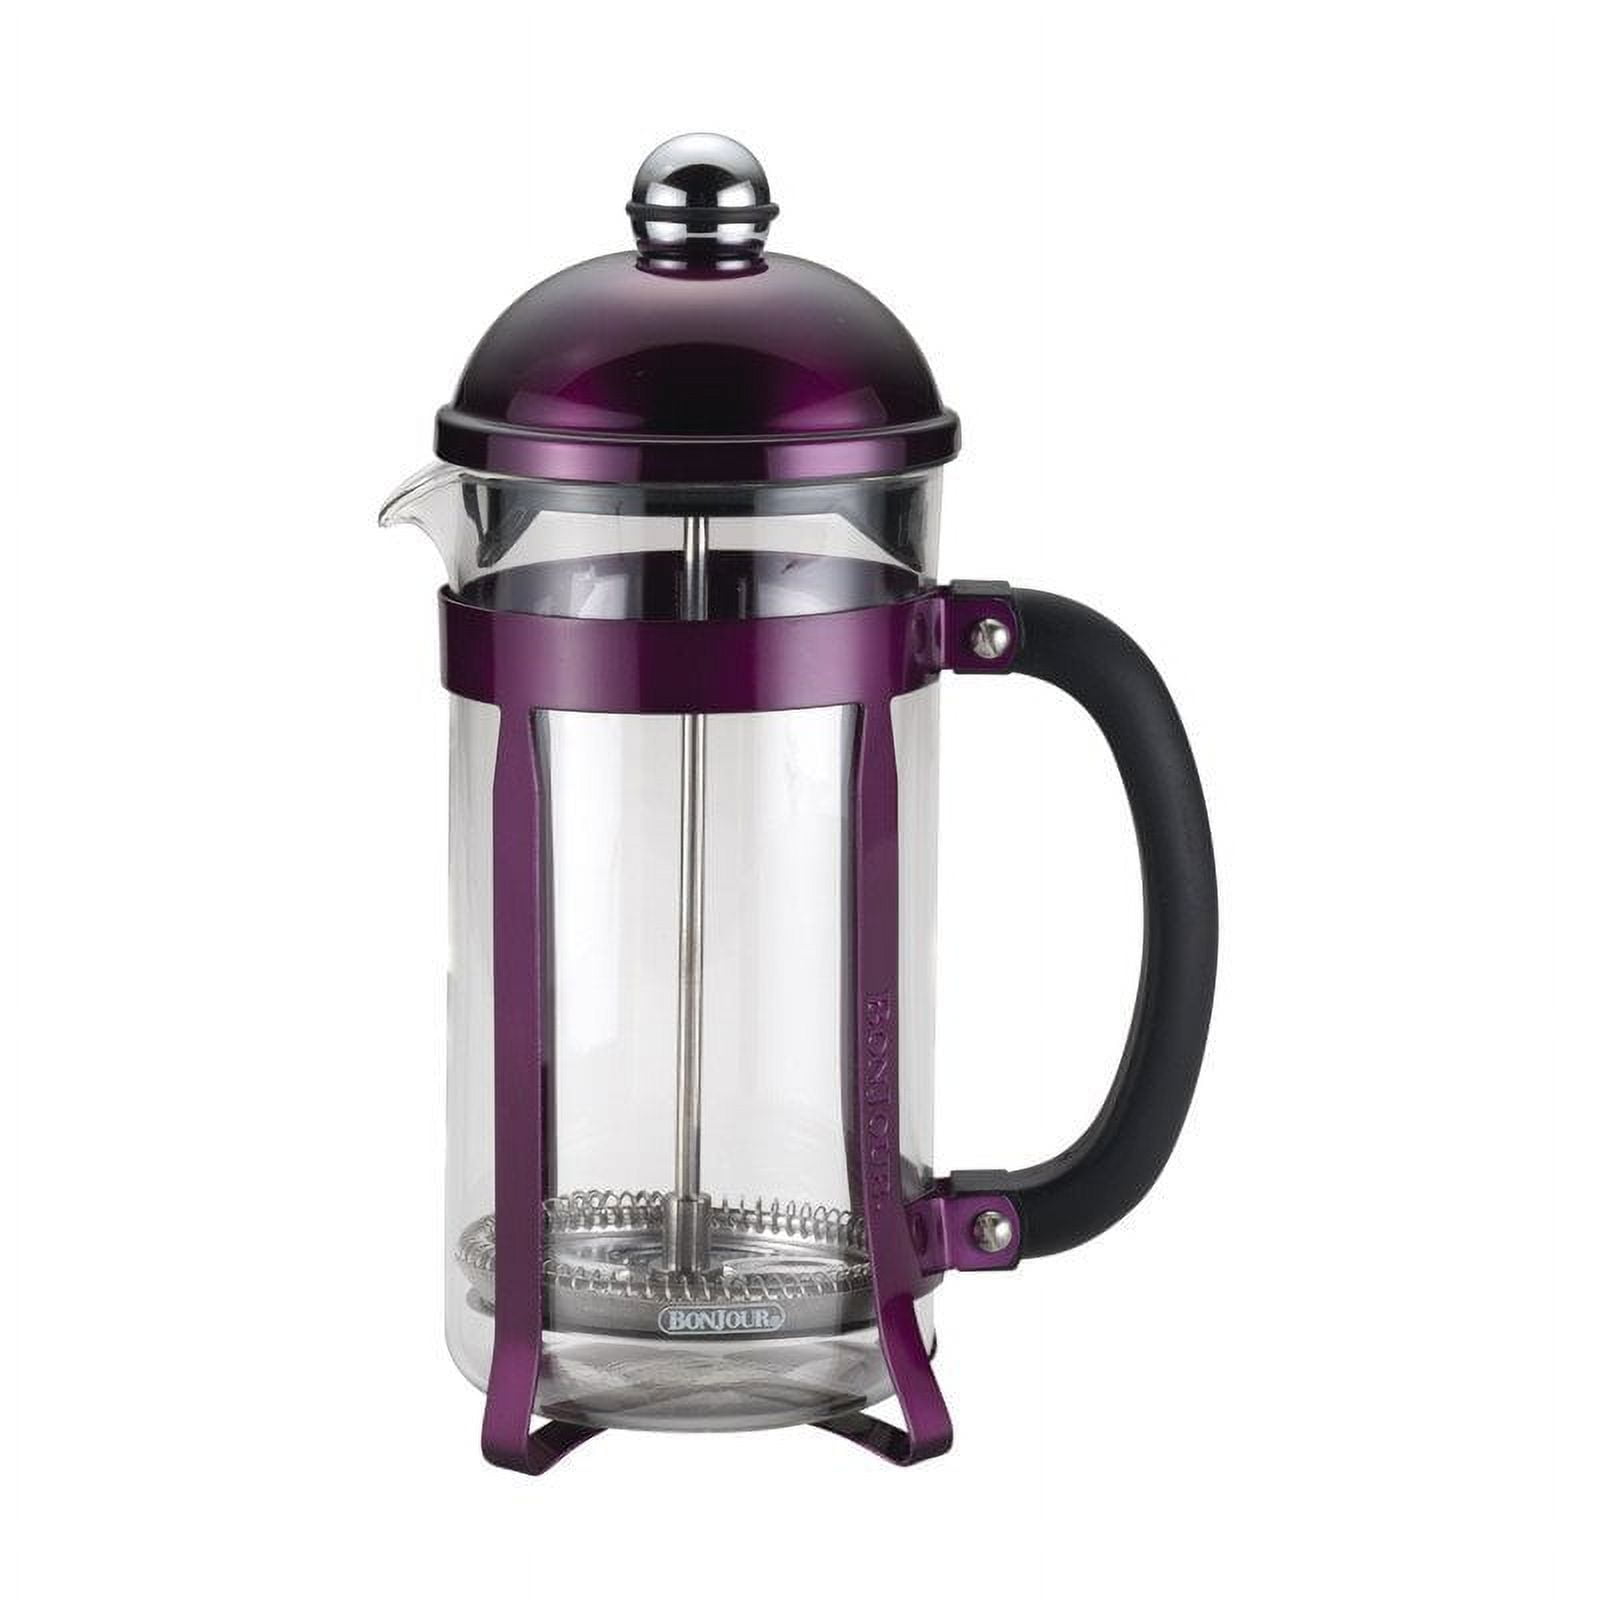  Gorgeous [8 Cup] French Press Coffee Maker & Tea Maker